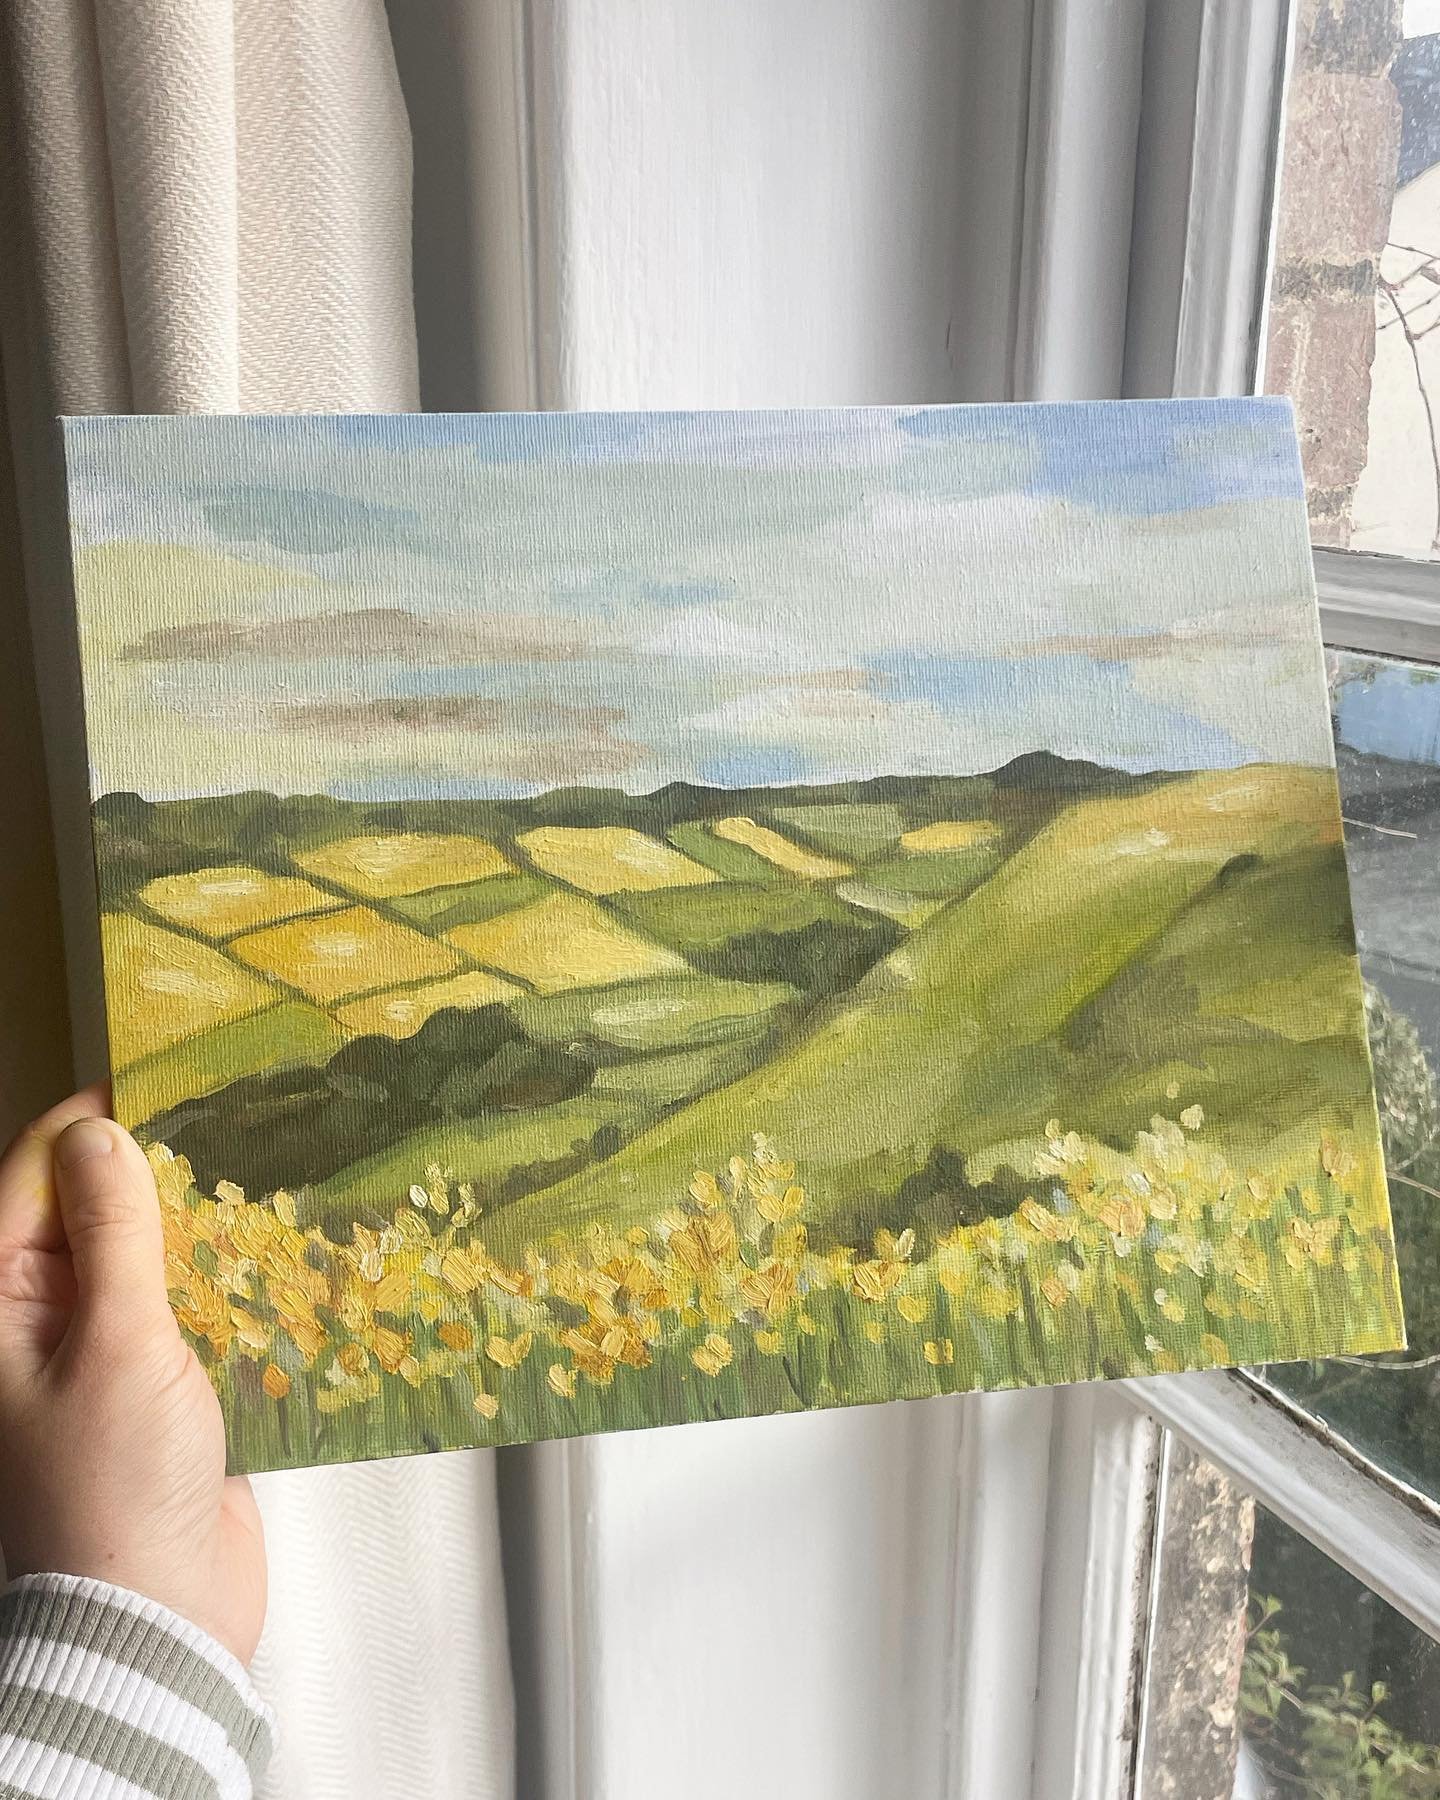 Yellow in the fields 🌾
Oil on board 

Taking commissions 💛

#artist #surreyartist #landscapes #painter #reigateartist #oilpainting